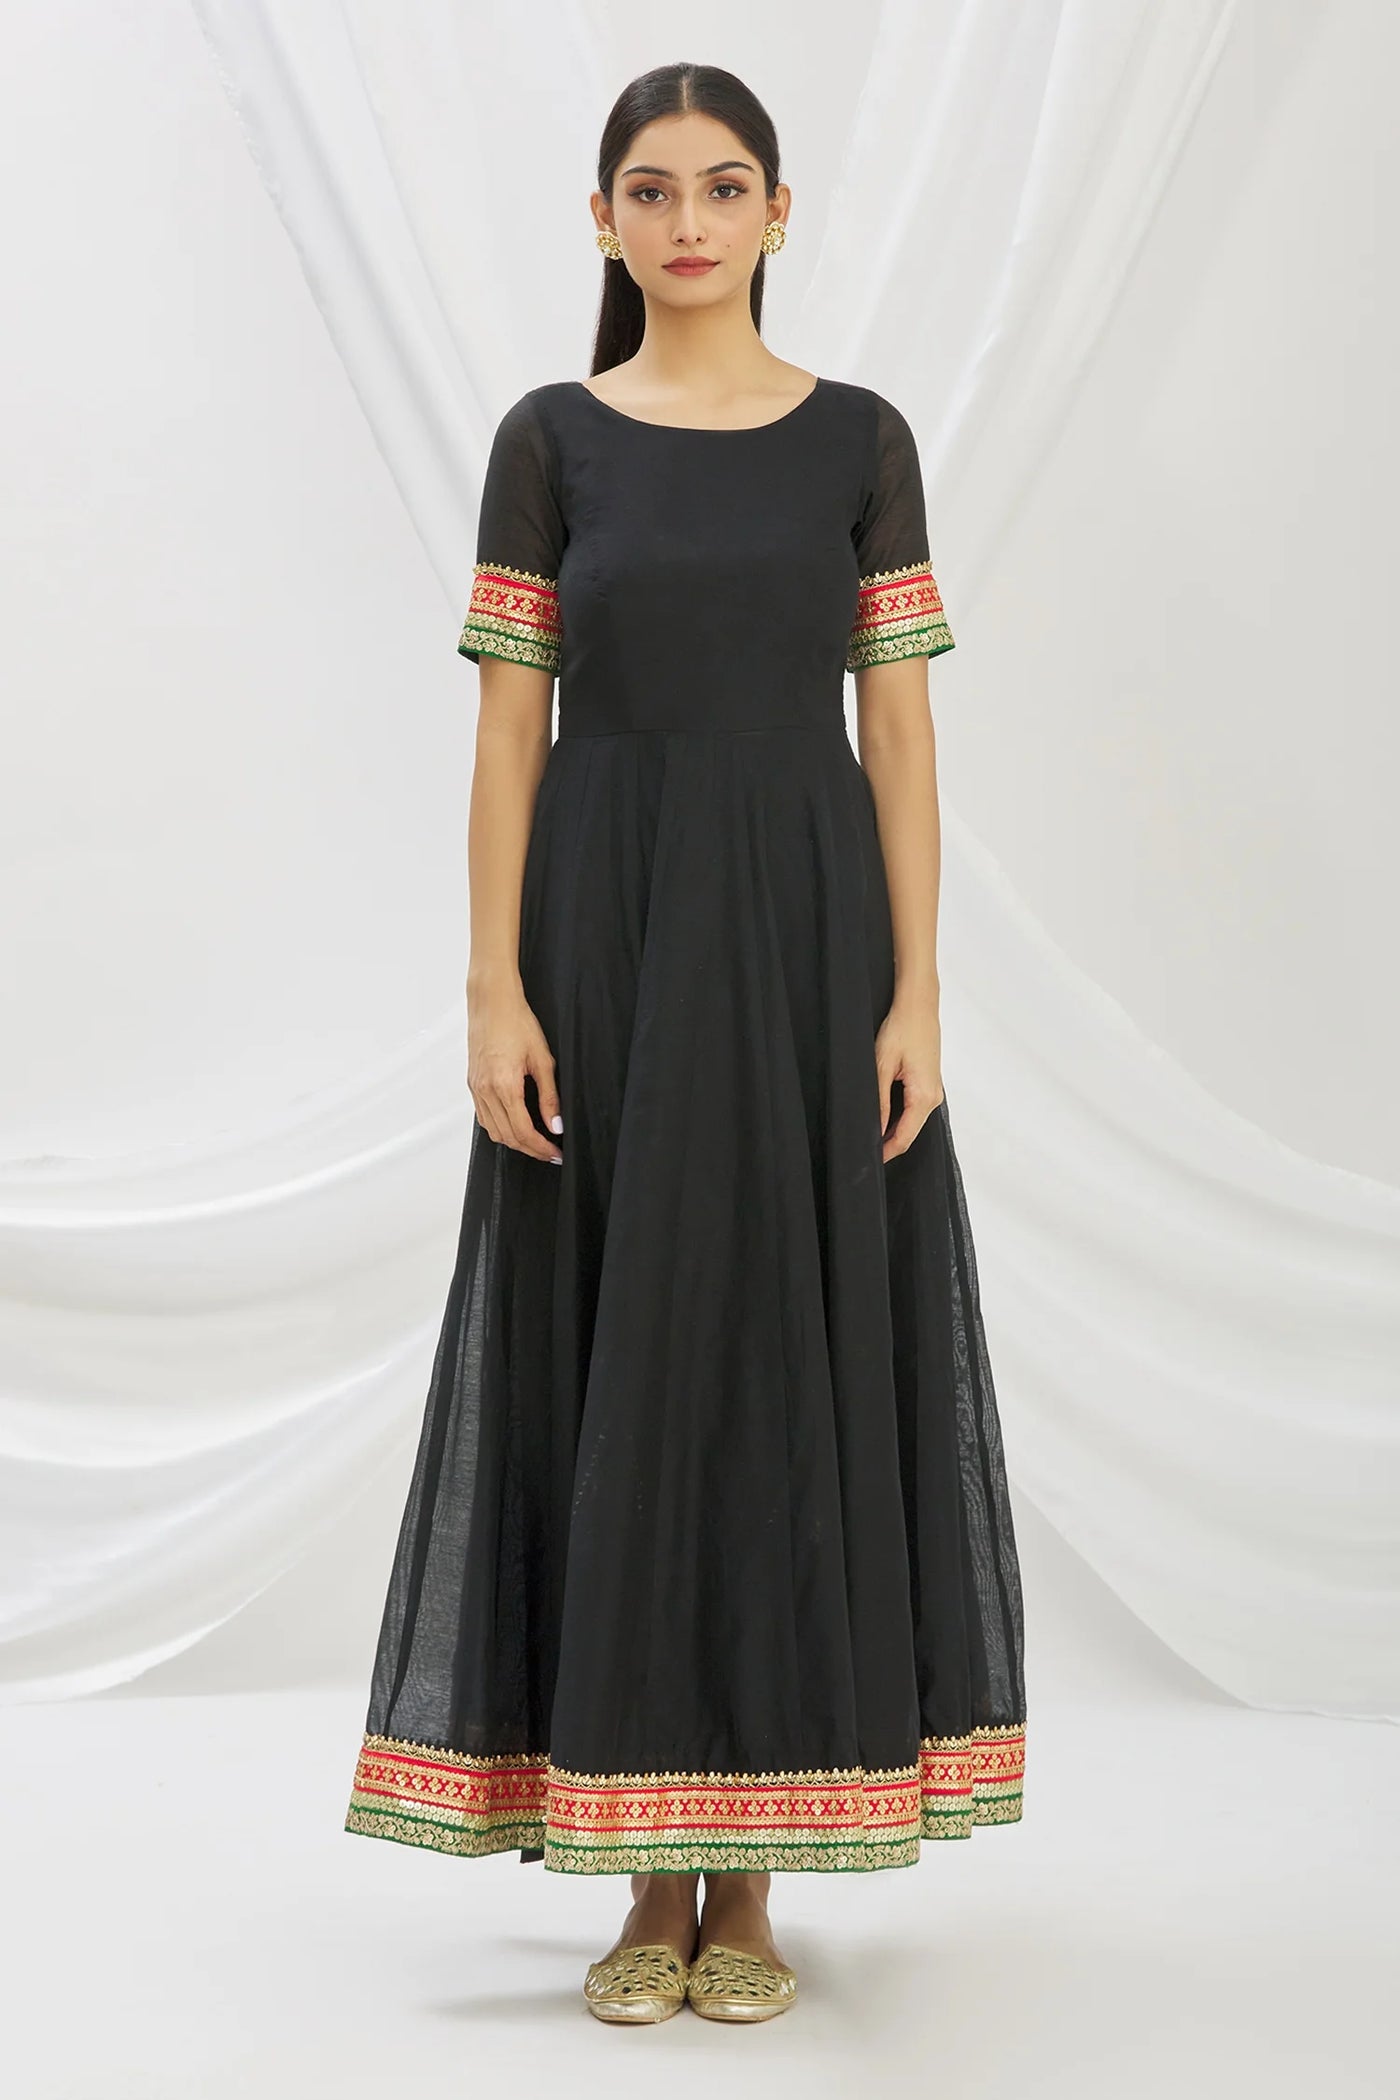 Black Chanderi Anarkali Set Indian Clothing in Denver, CO, Aurora, CO, Boulder, CO, Fort Collins, CO, Colorado Springs, CO, Parker, CO, Highlands Ranch, CO, Cherry Creek, CO, Centennial, CO, and Longmont, CO. NATIONWIDE SHIPPING USA- India Fashion X